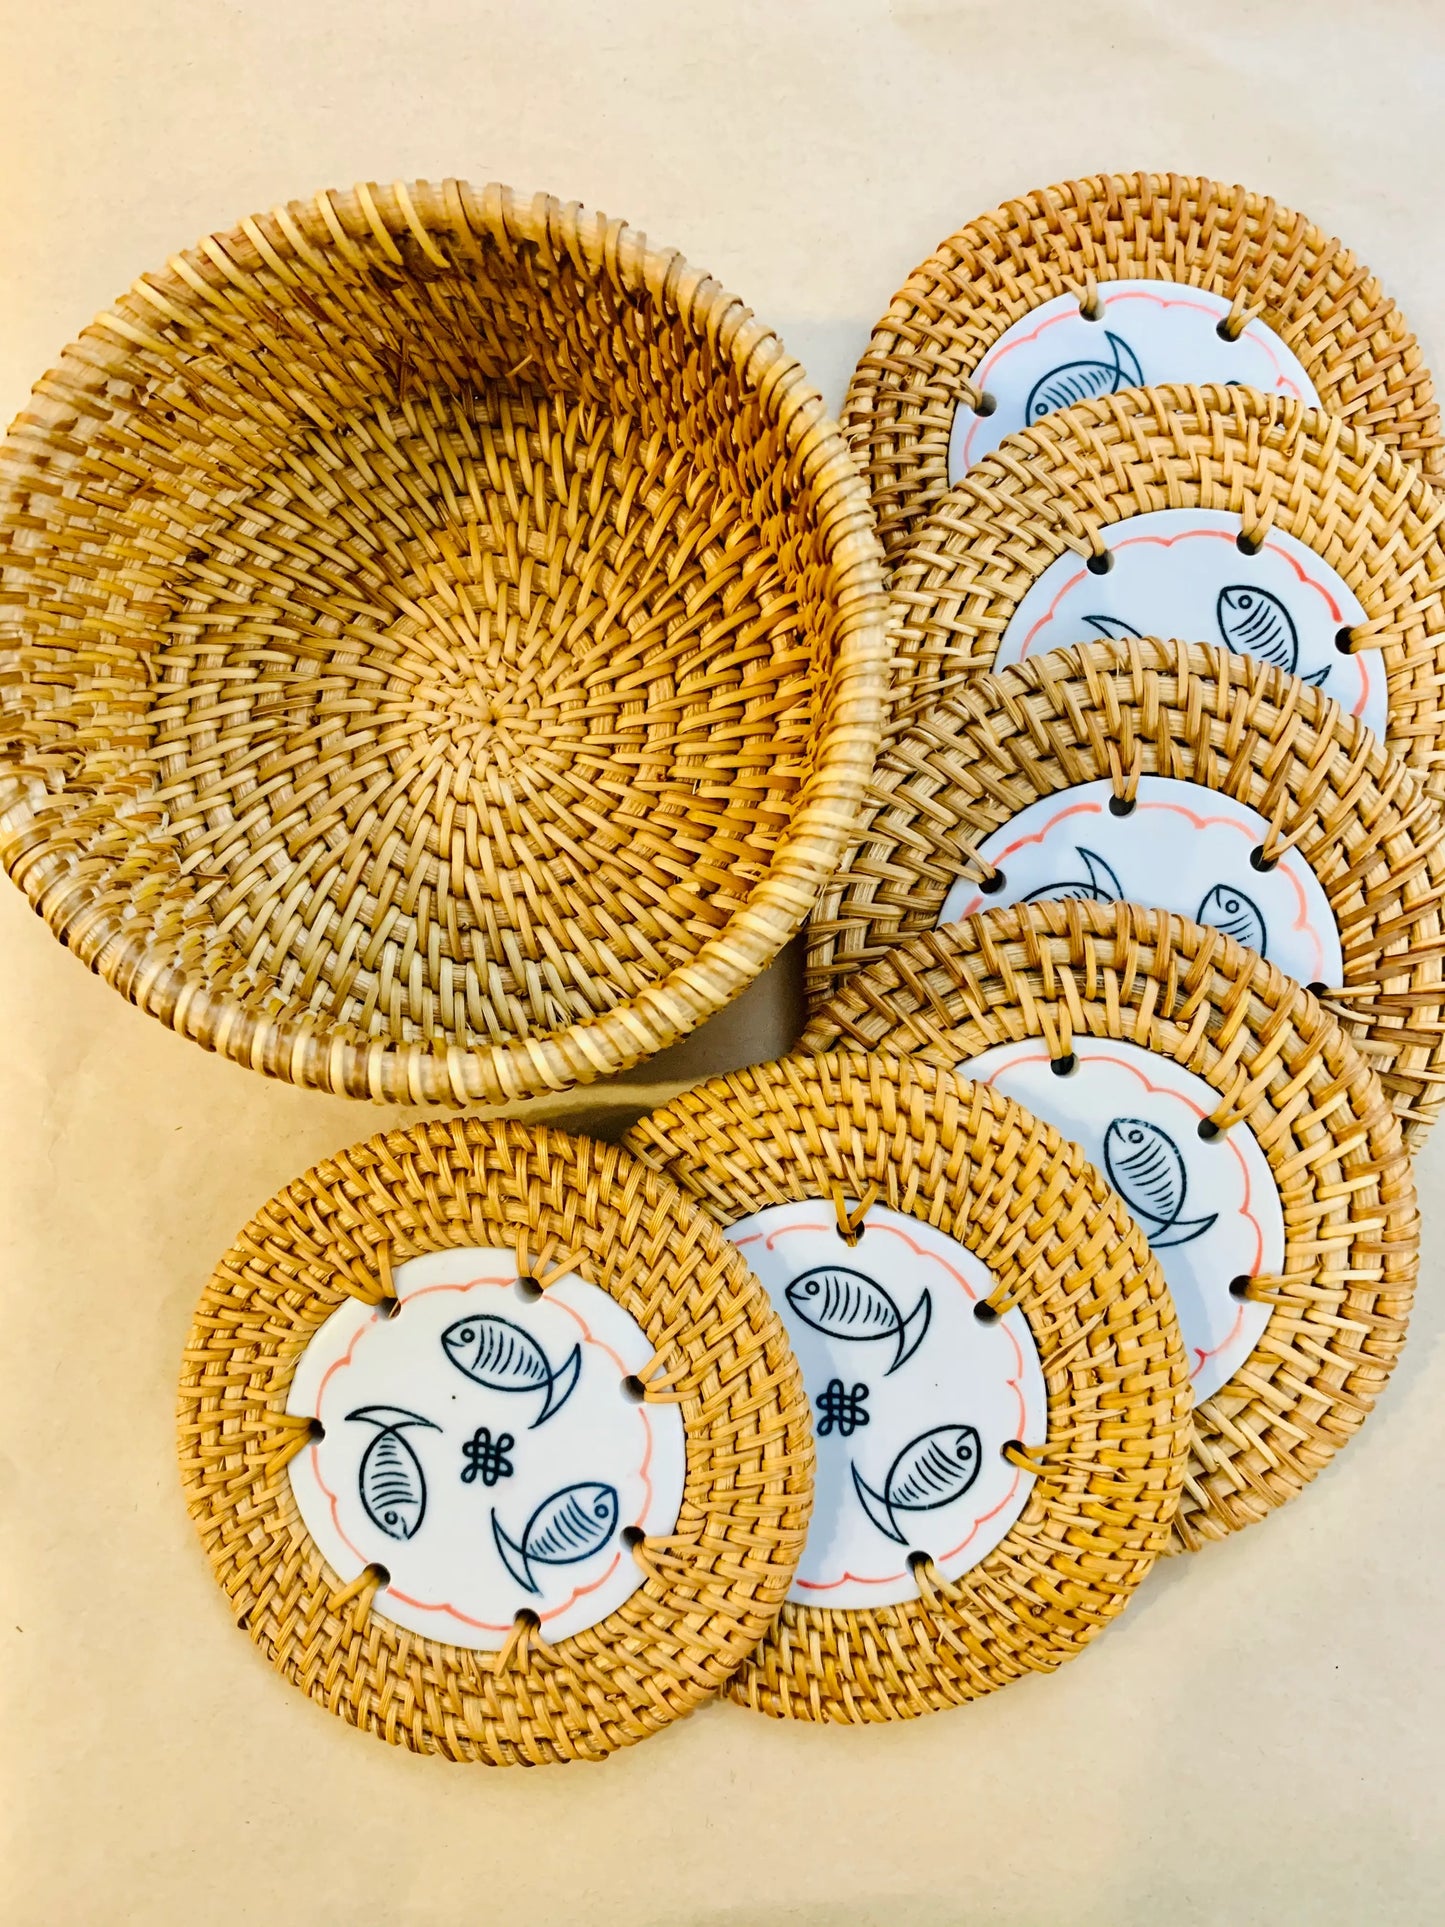 6 rattan coasters with Rattan Holder - #EH-0504